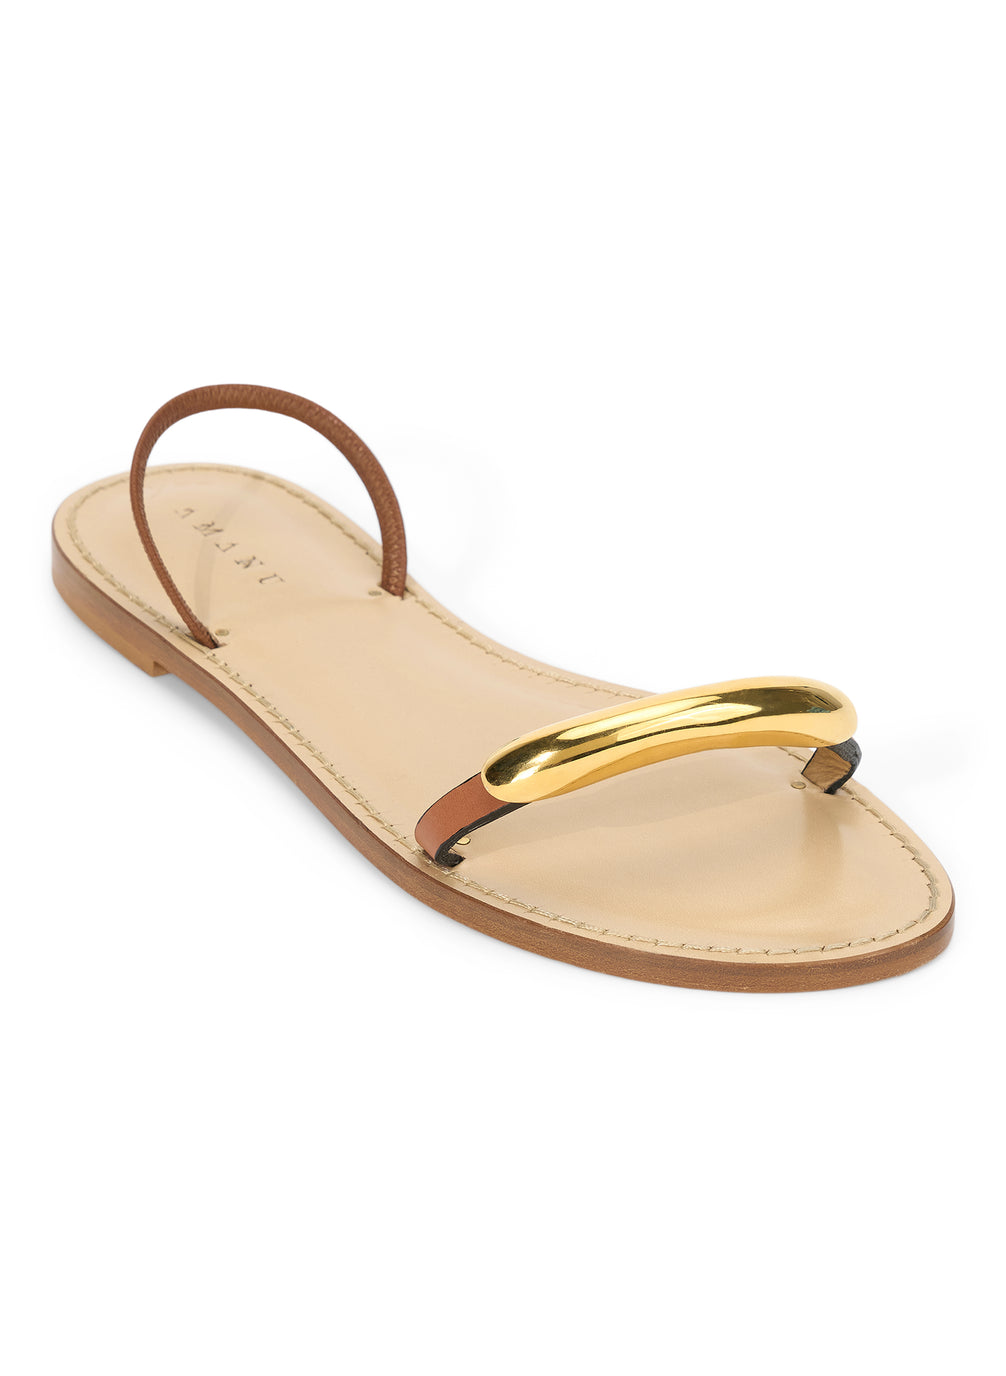 brown sandal with gold plated accent